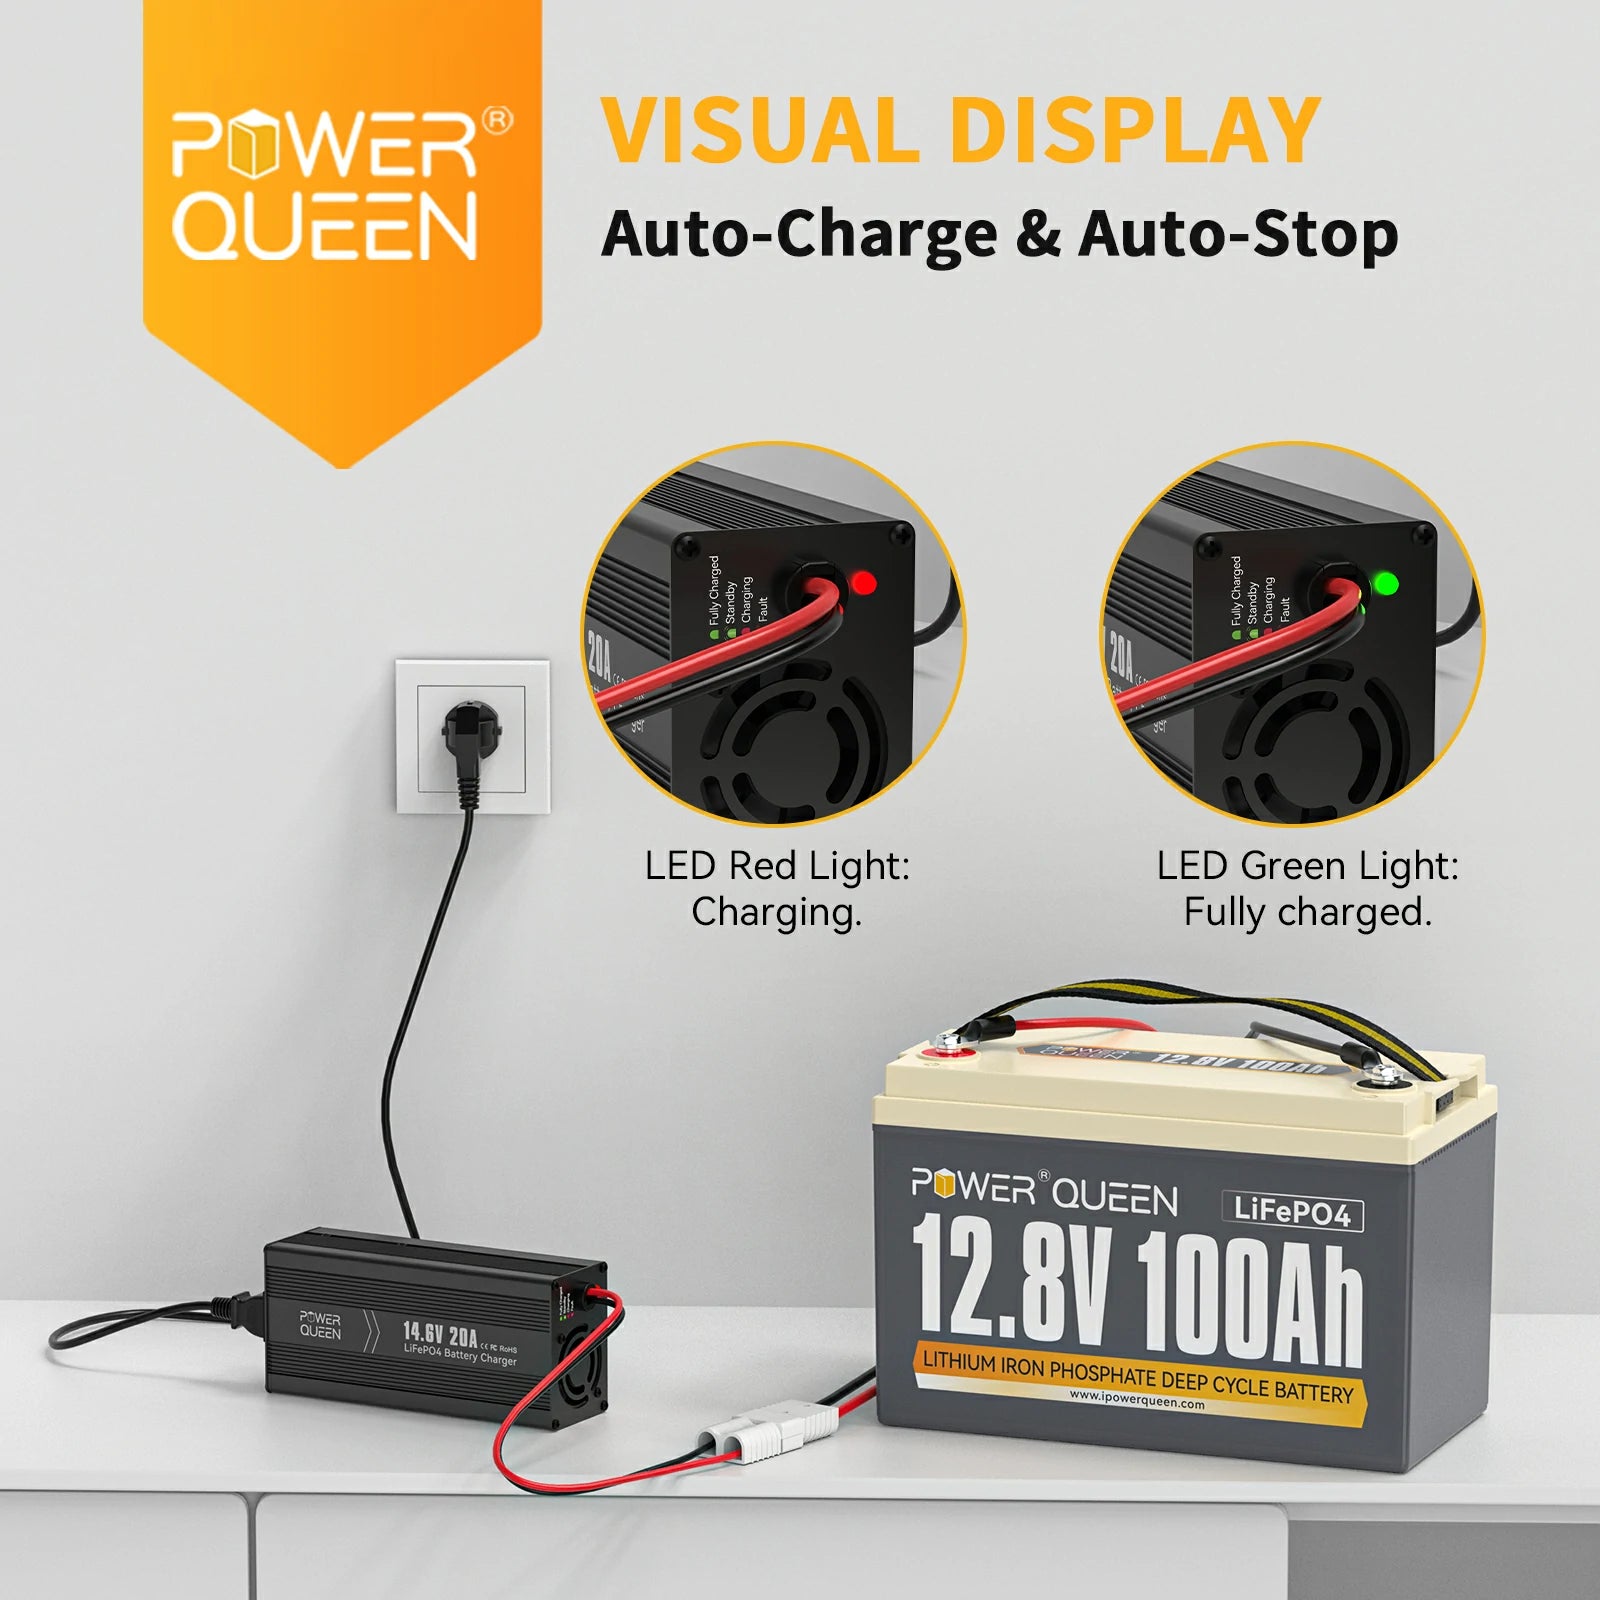 Power-Queen-14.6V-20A-battery-charger-for-12V-lithium-ion-battery